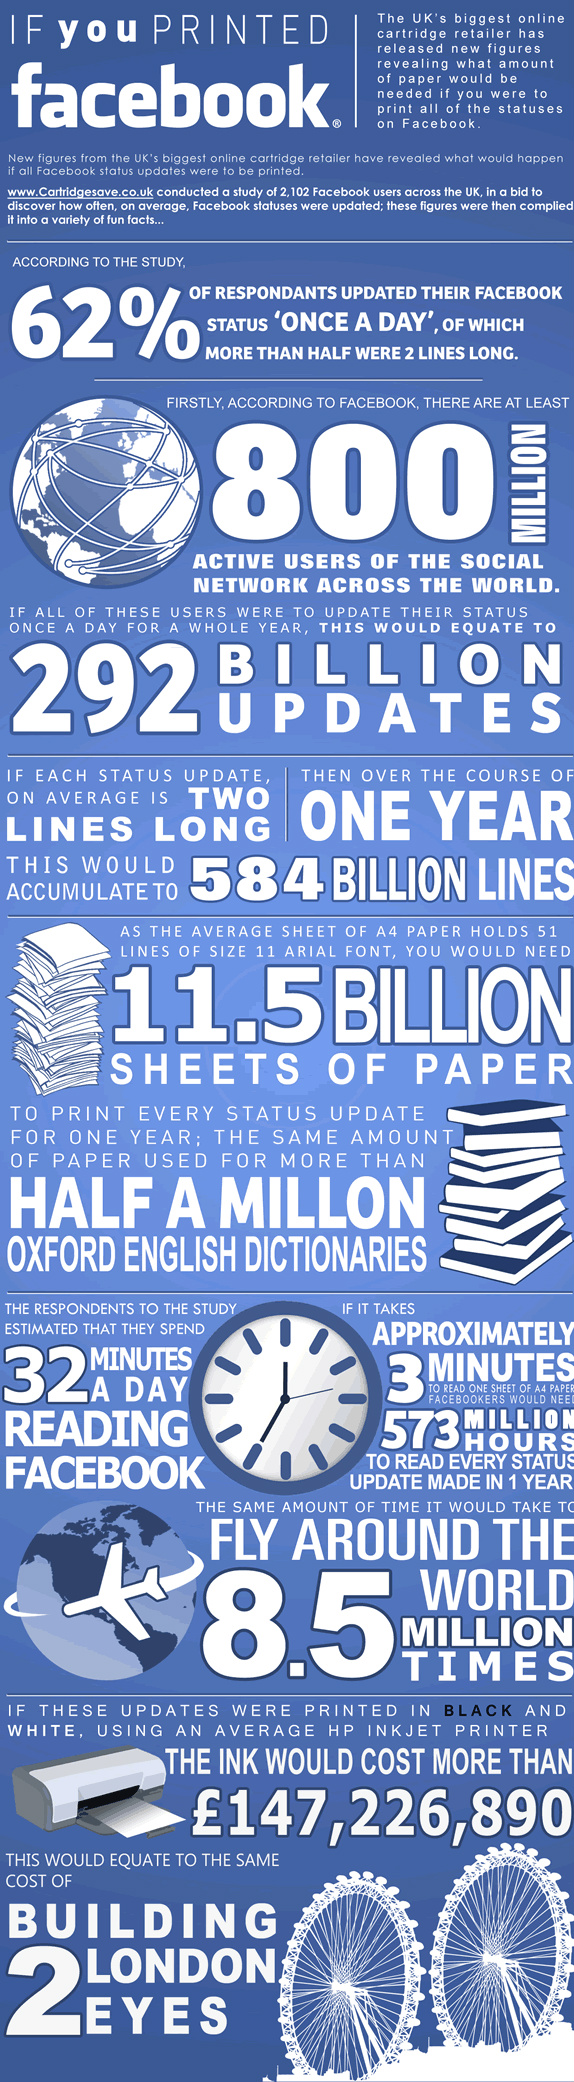 A year's worth of Facebook updates add up to 1.5 billion pages of paper [infographic]